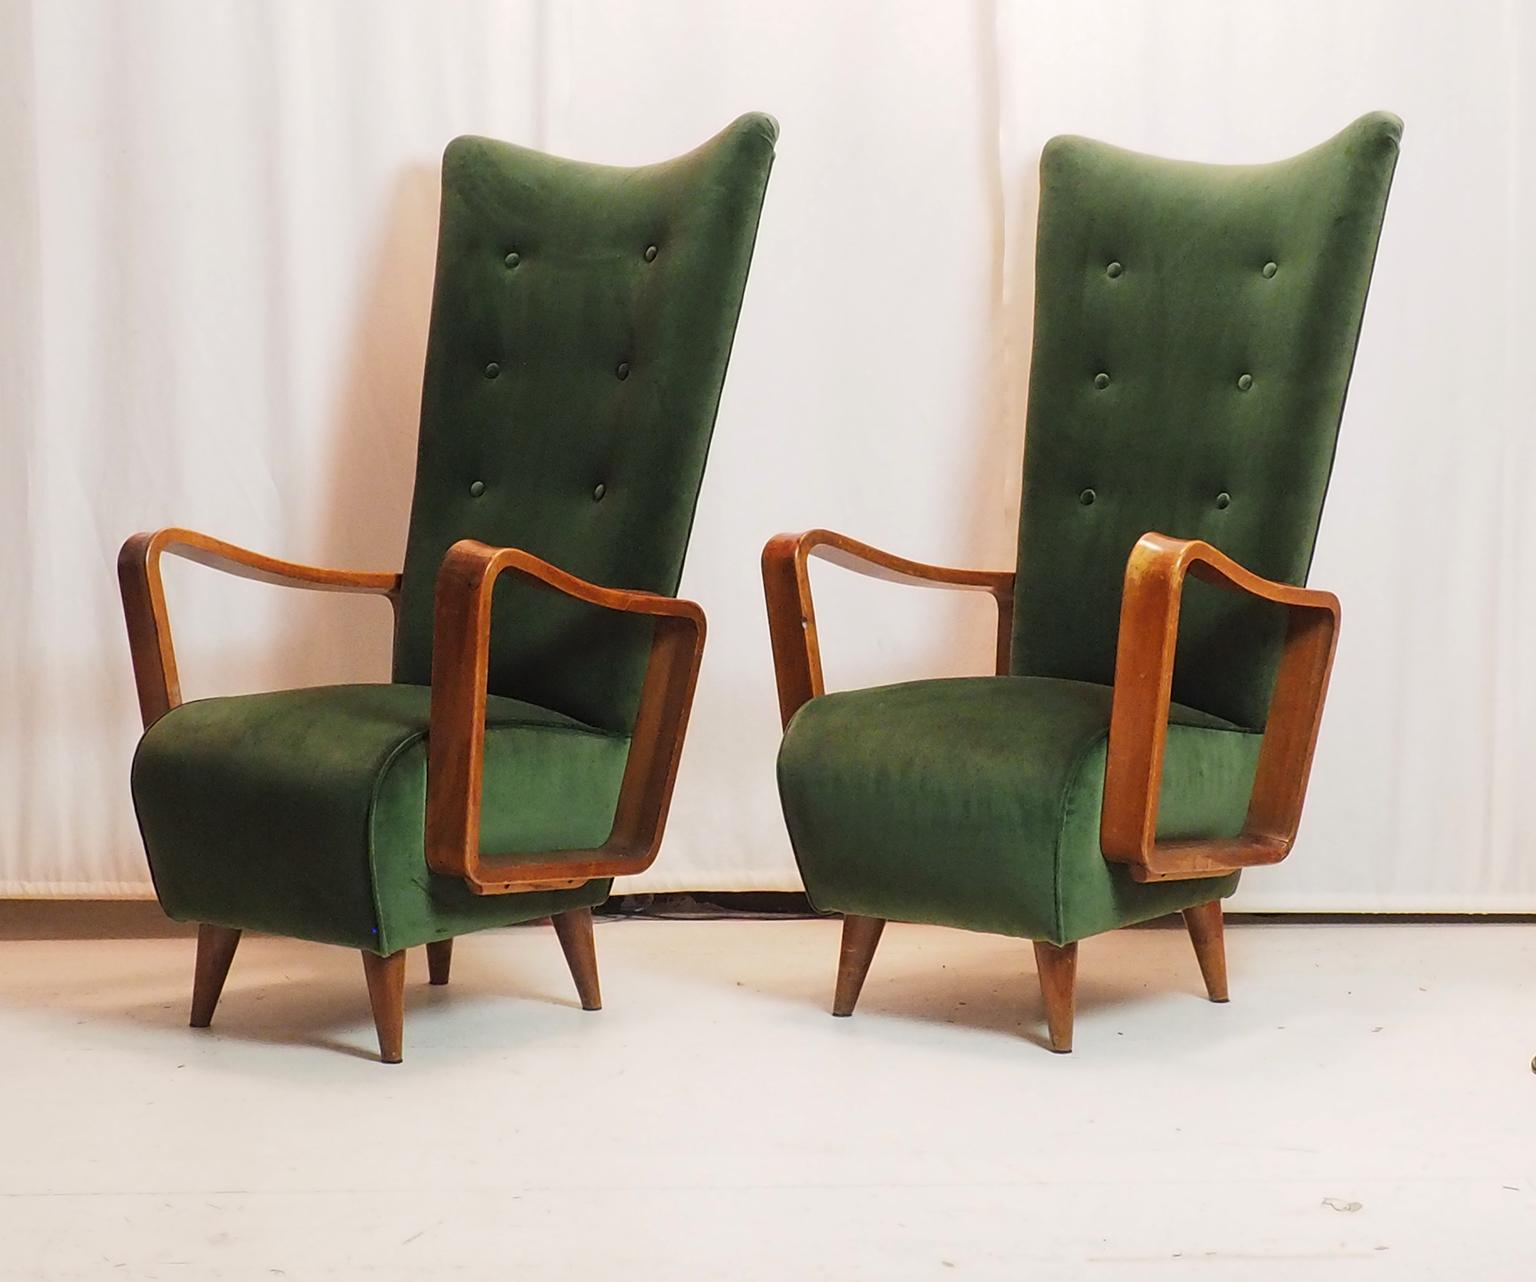 Splendid pair of armchairs designed by the Italian architect Pietro Lingeri,
with high back and pronounced wooden armrests.
Covered with a green oak velvet, pure Italian cotton.
Elegant and stylish.

Perfectly upholdtered with wonderful green Velvet